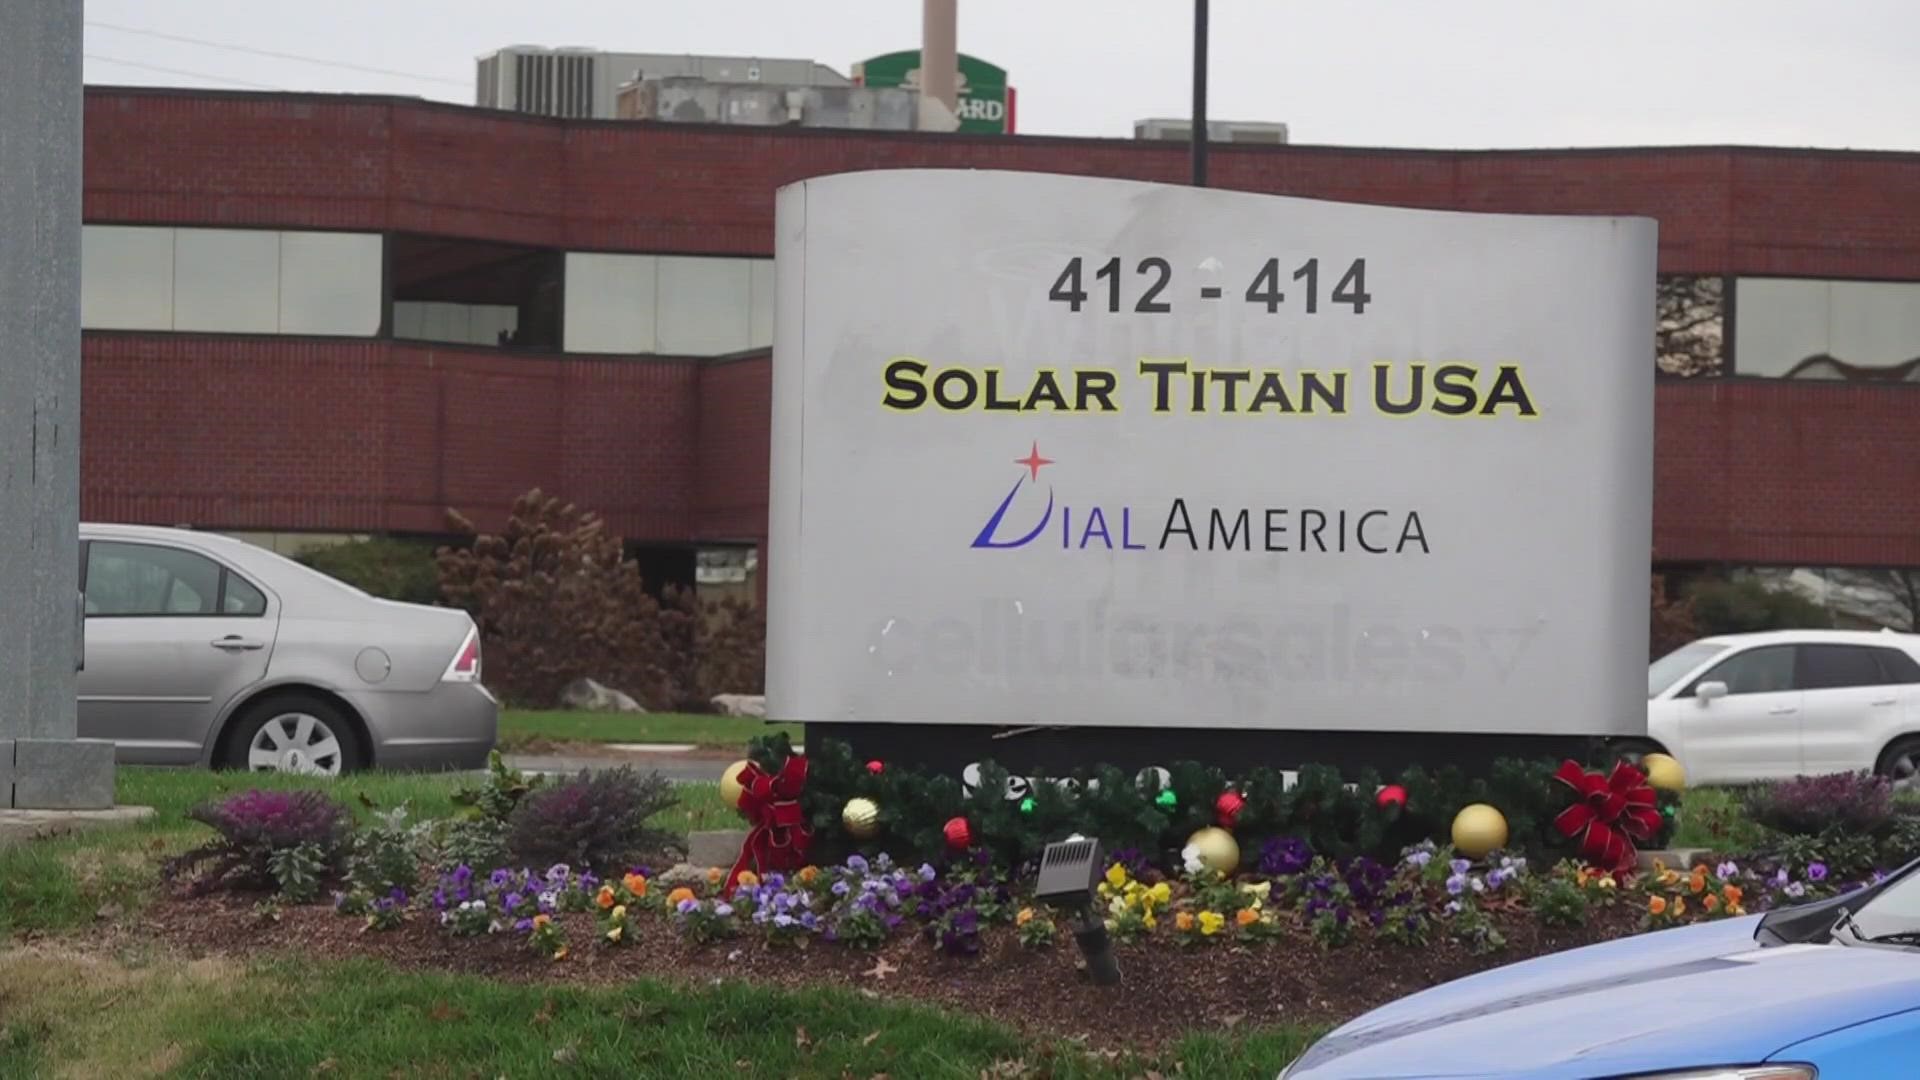 Solar Titan USA is accused of harming hundreds of customers across the Southeast.